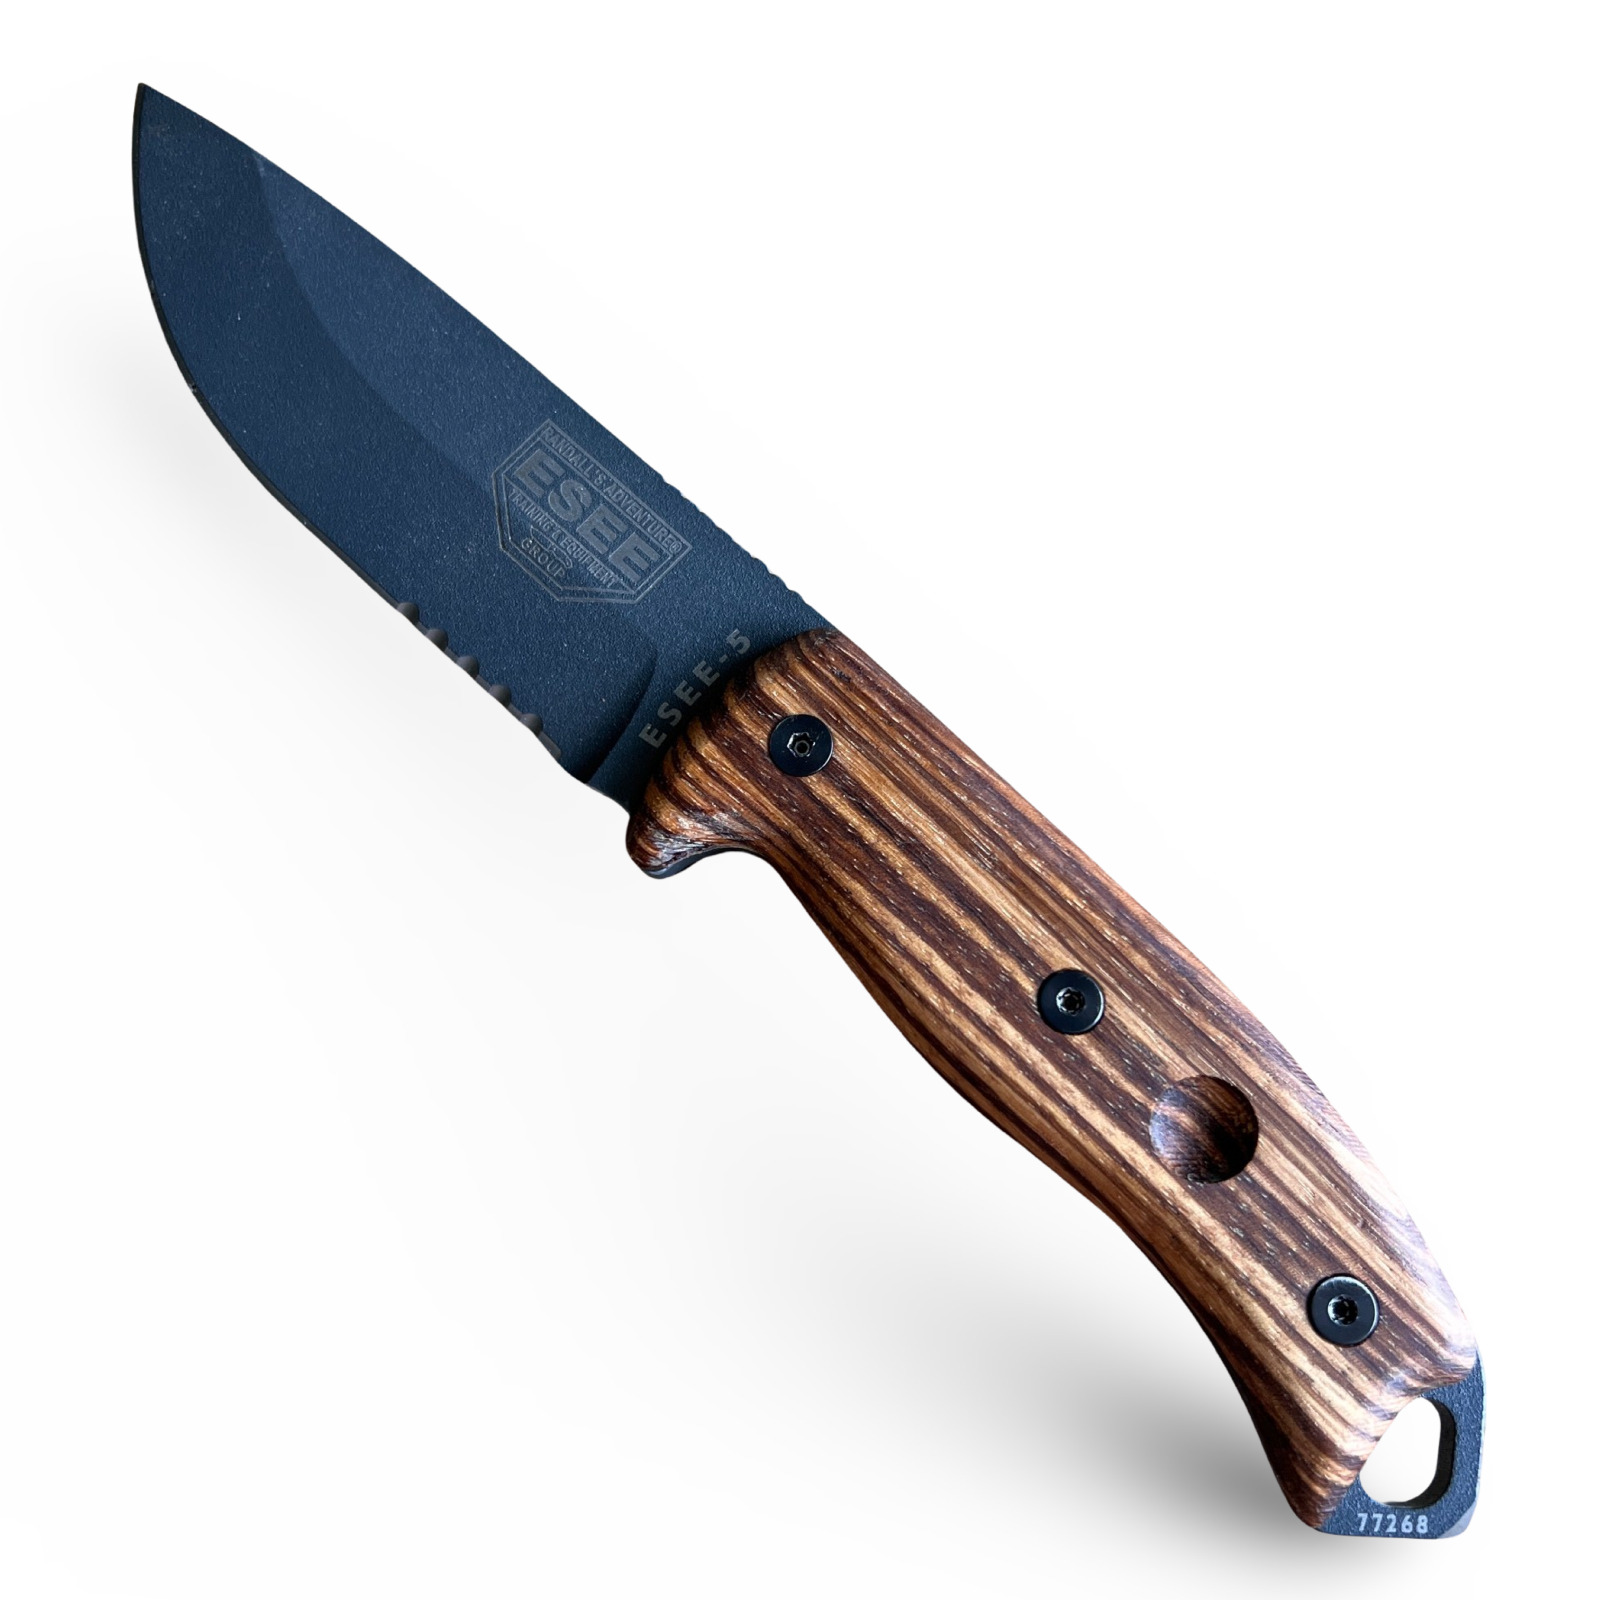 Scales compatible with ESEE-5/6 knife Solid zebra wood